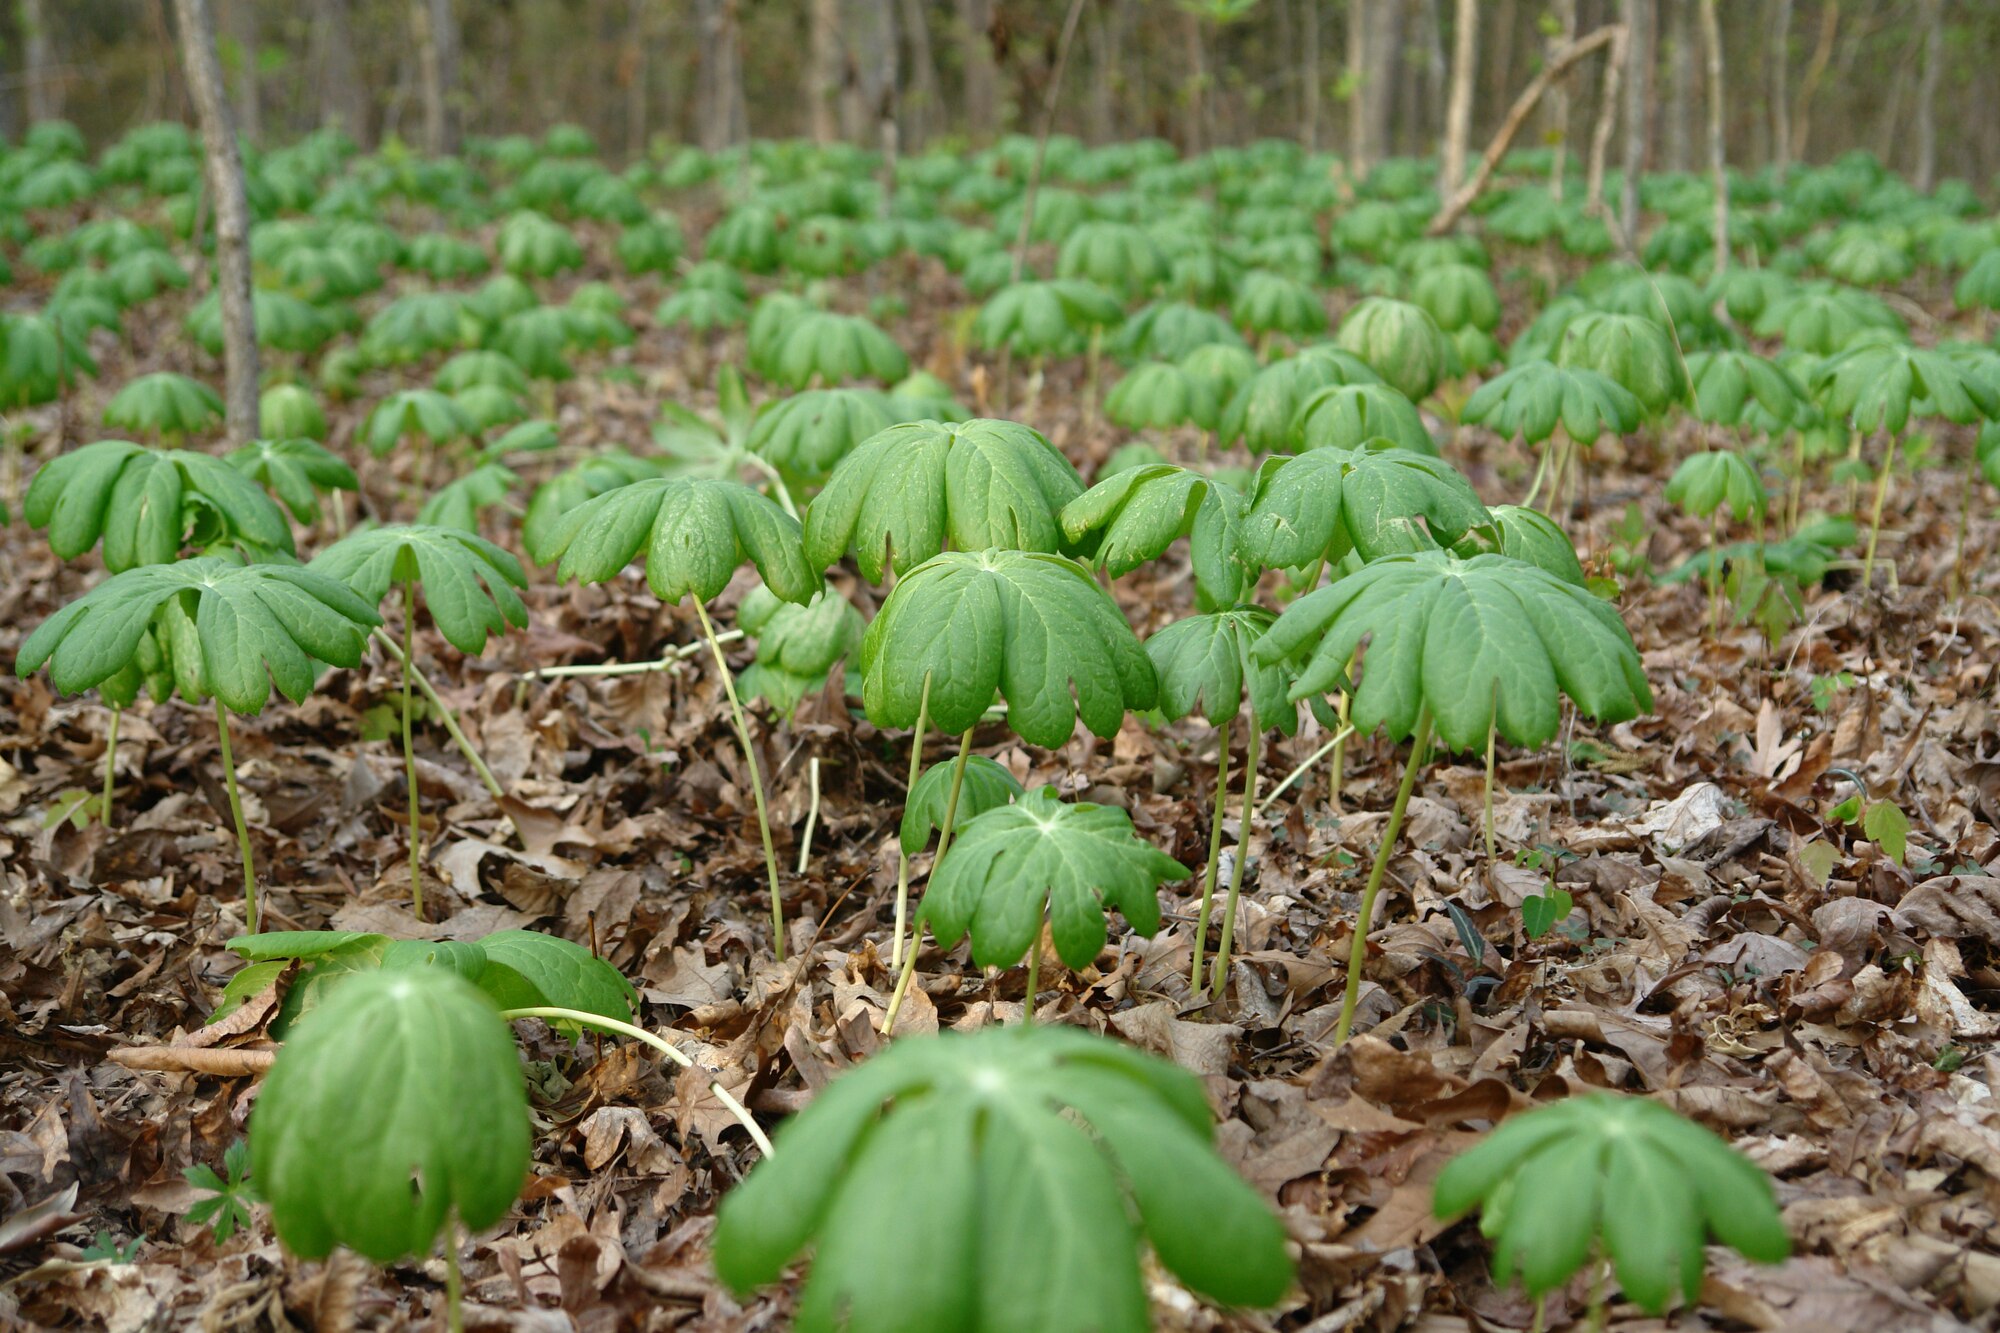 Mayapples near Sinking Pond at Arnold Air Force Base, Tenn., are a herbaceous perennial plant that blooms in late May. The name is misleading because the flower appears in early May, not the “apple,” which is not related to the fruit that bears the same name. All parts of the plant, except the fruit, are poisonous. The underground stem of the mayapple has been used for a variety of medicinal purposes, originally by Native Americans and later by other settlers.